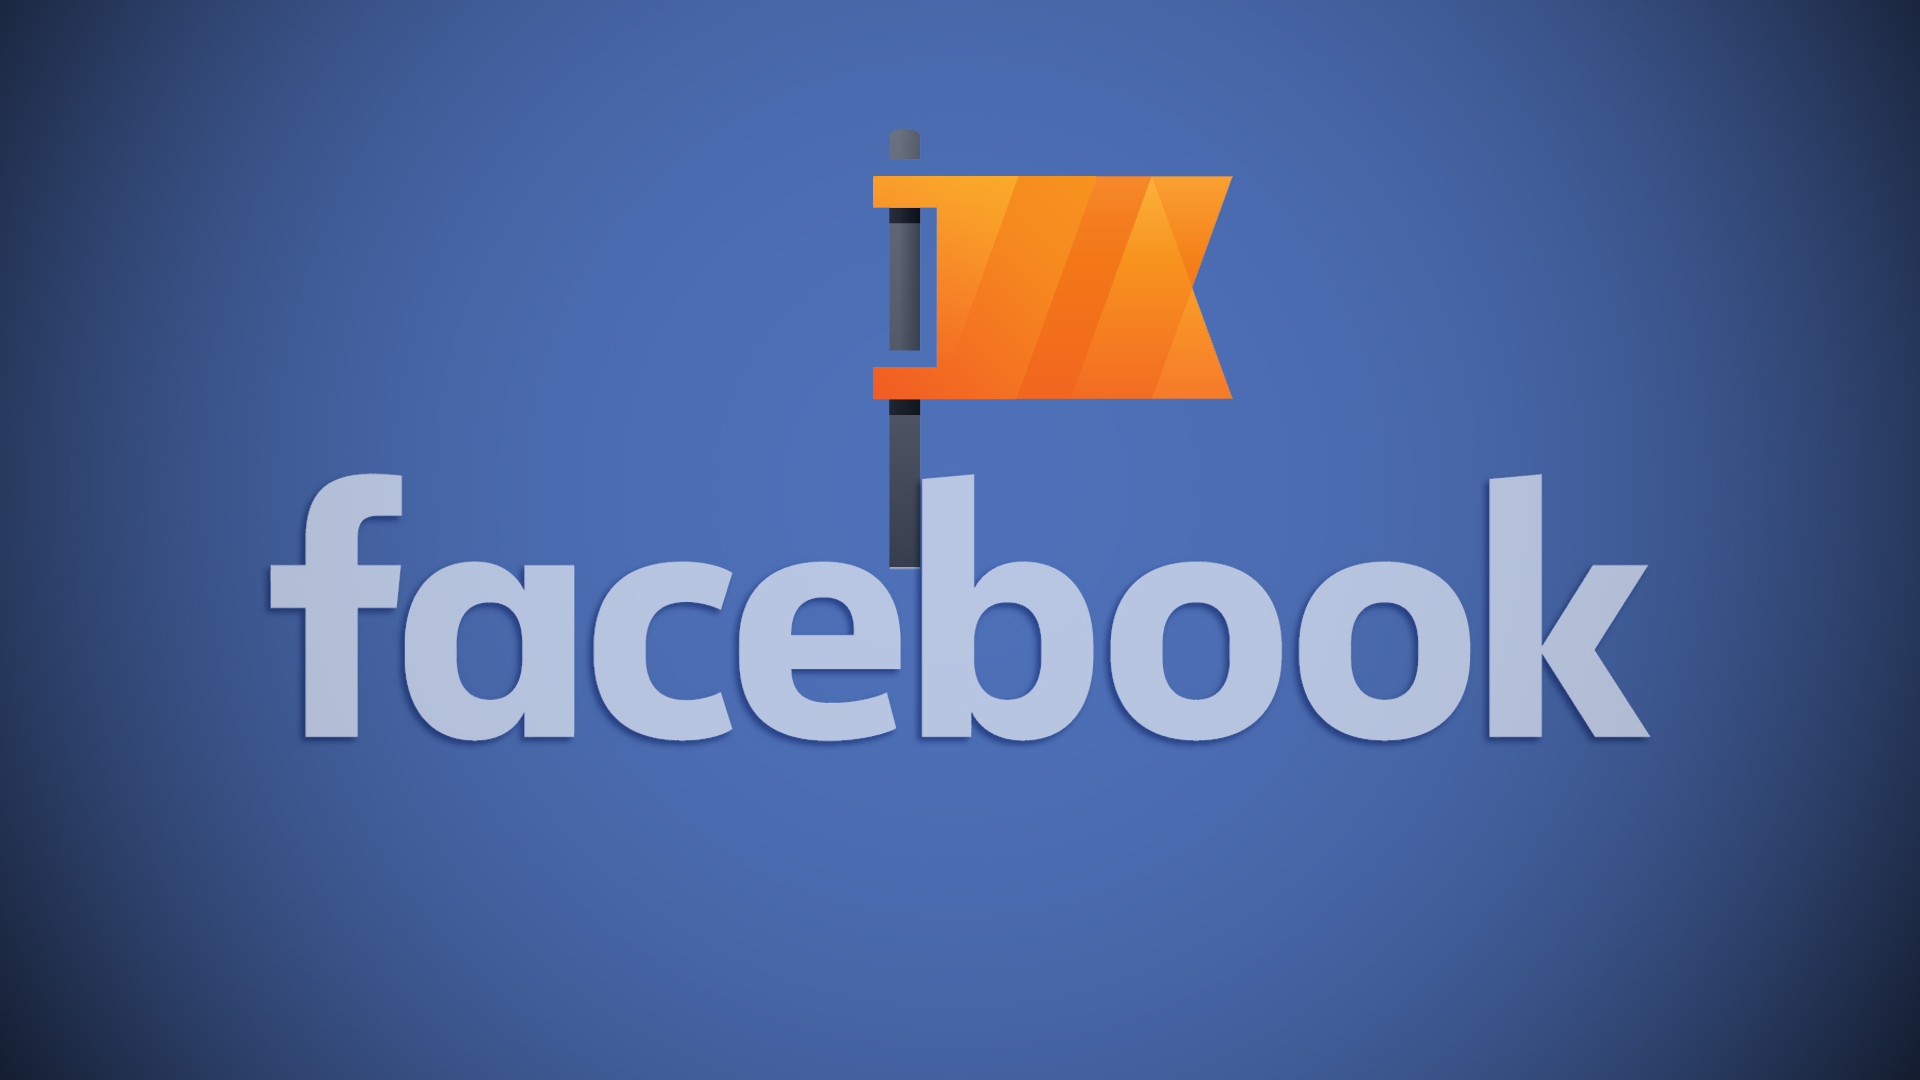 Facebook Pages - Facebook Page - HD Wallpaper 